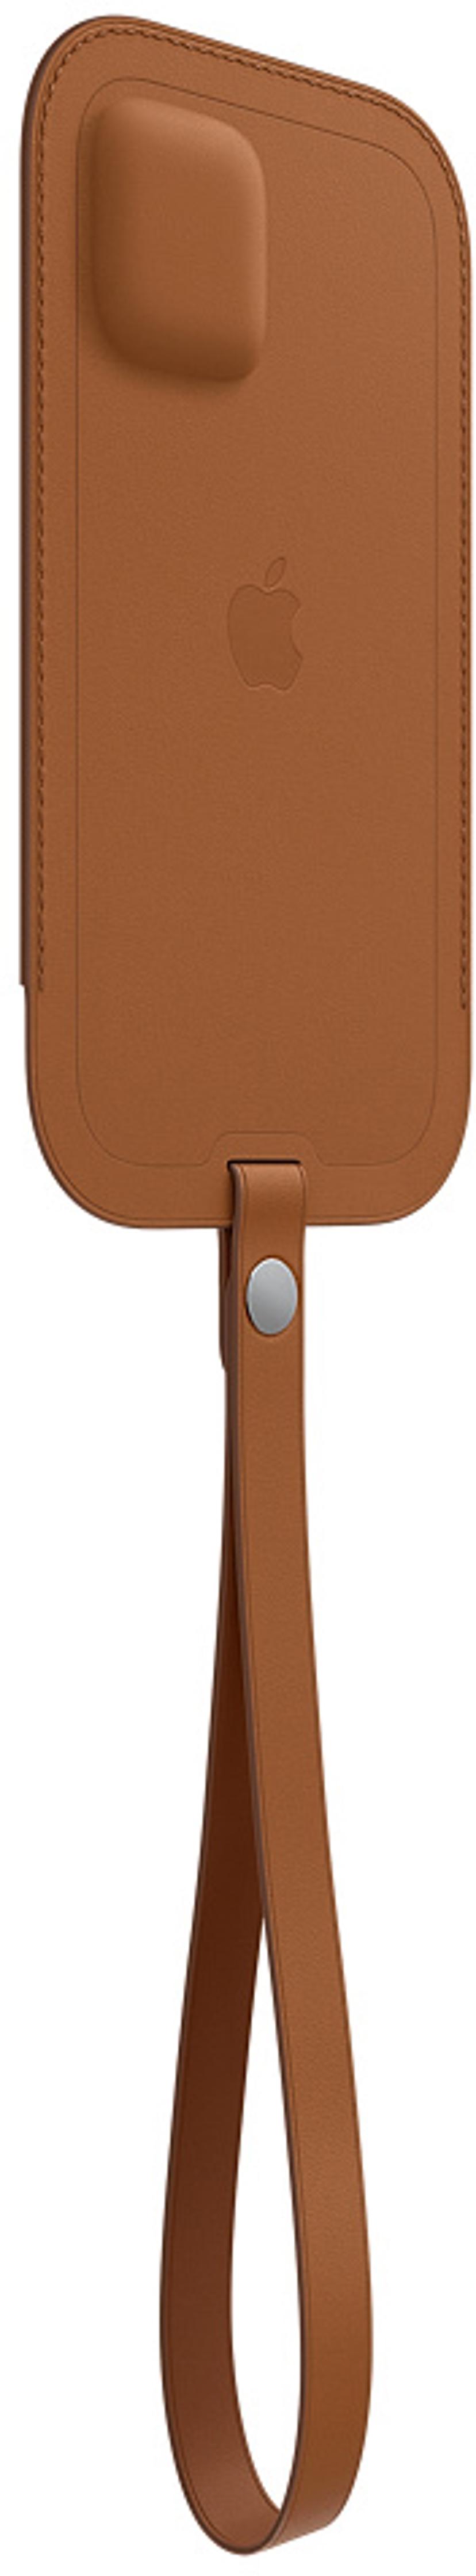 Apple Sleeve with MagSafe iPhone 12, iPhone 12 Pro Saddle brown